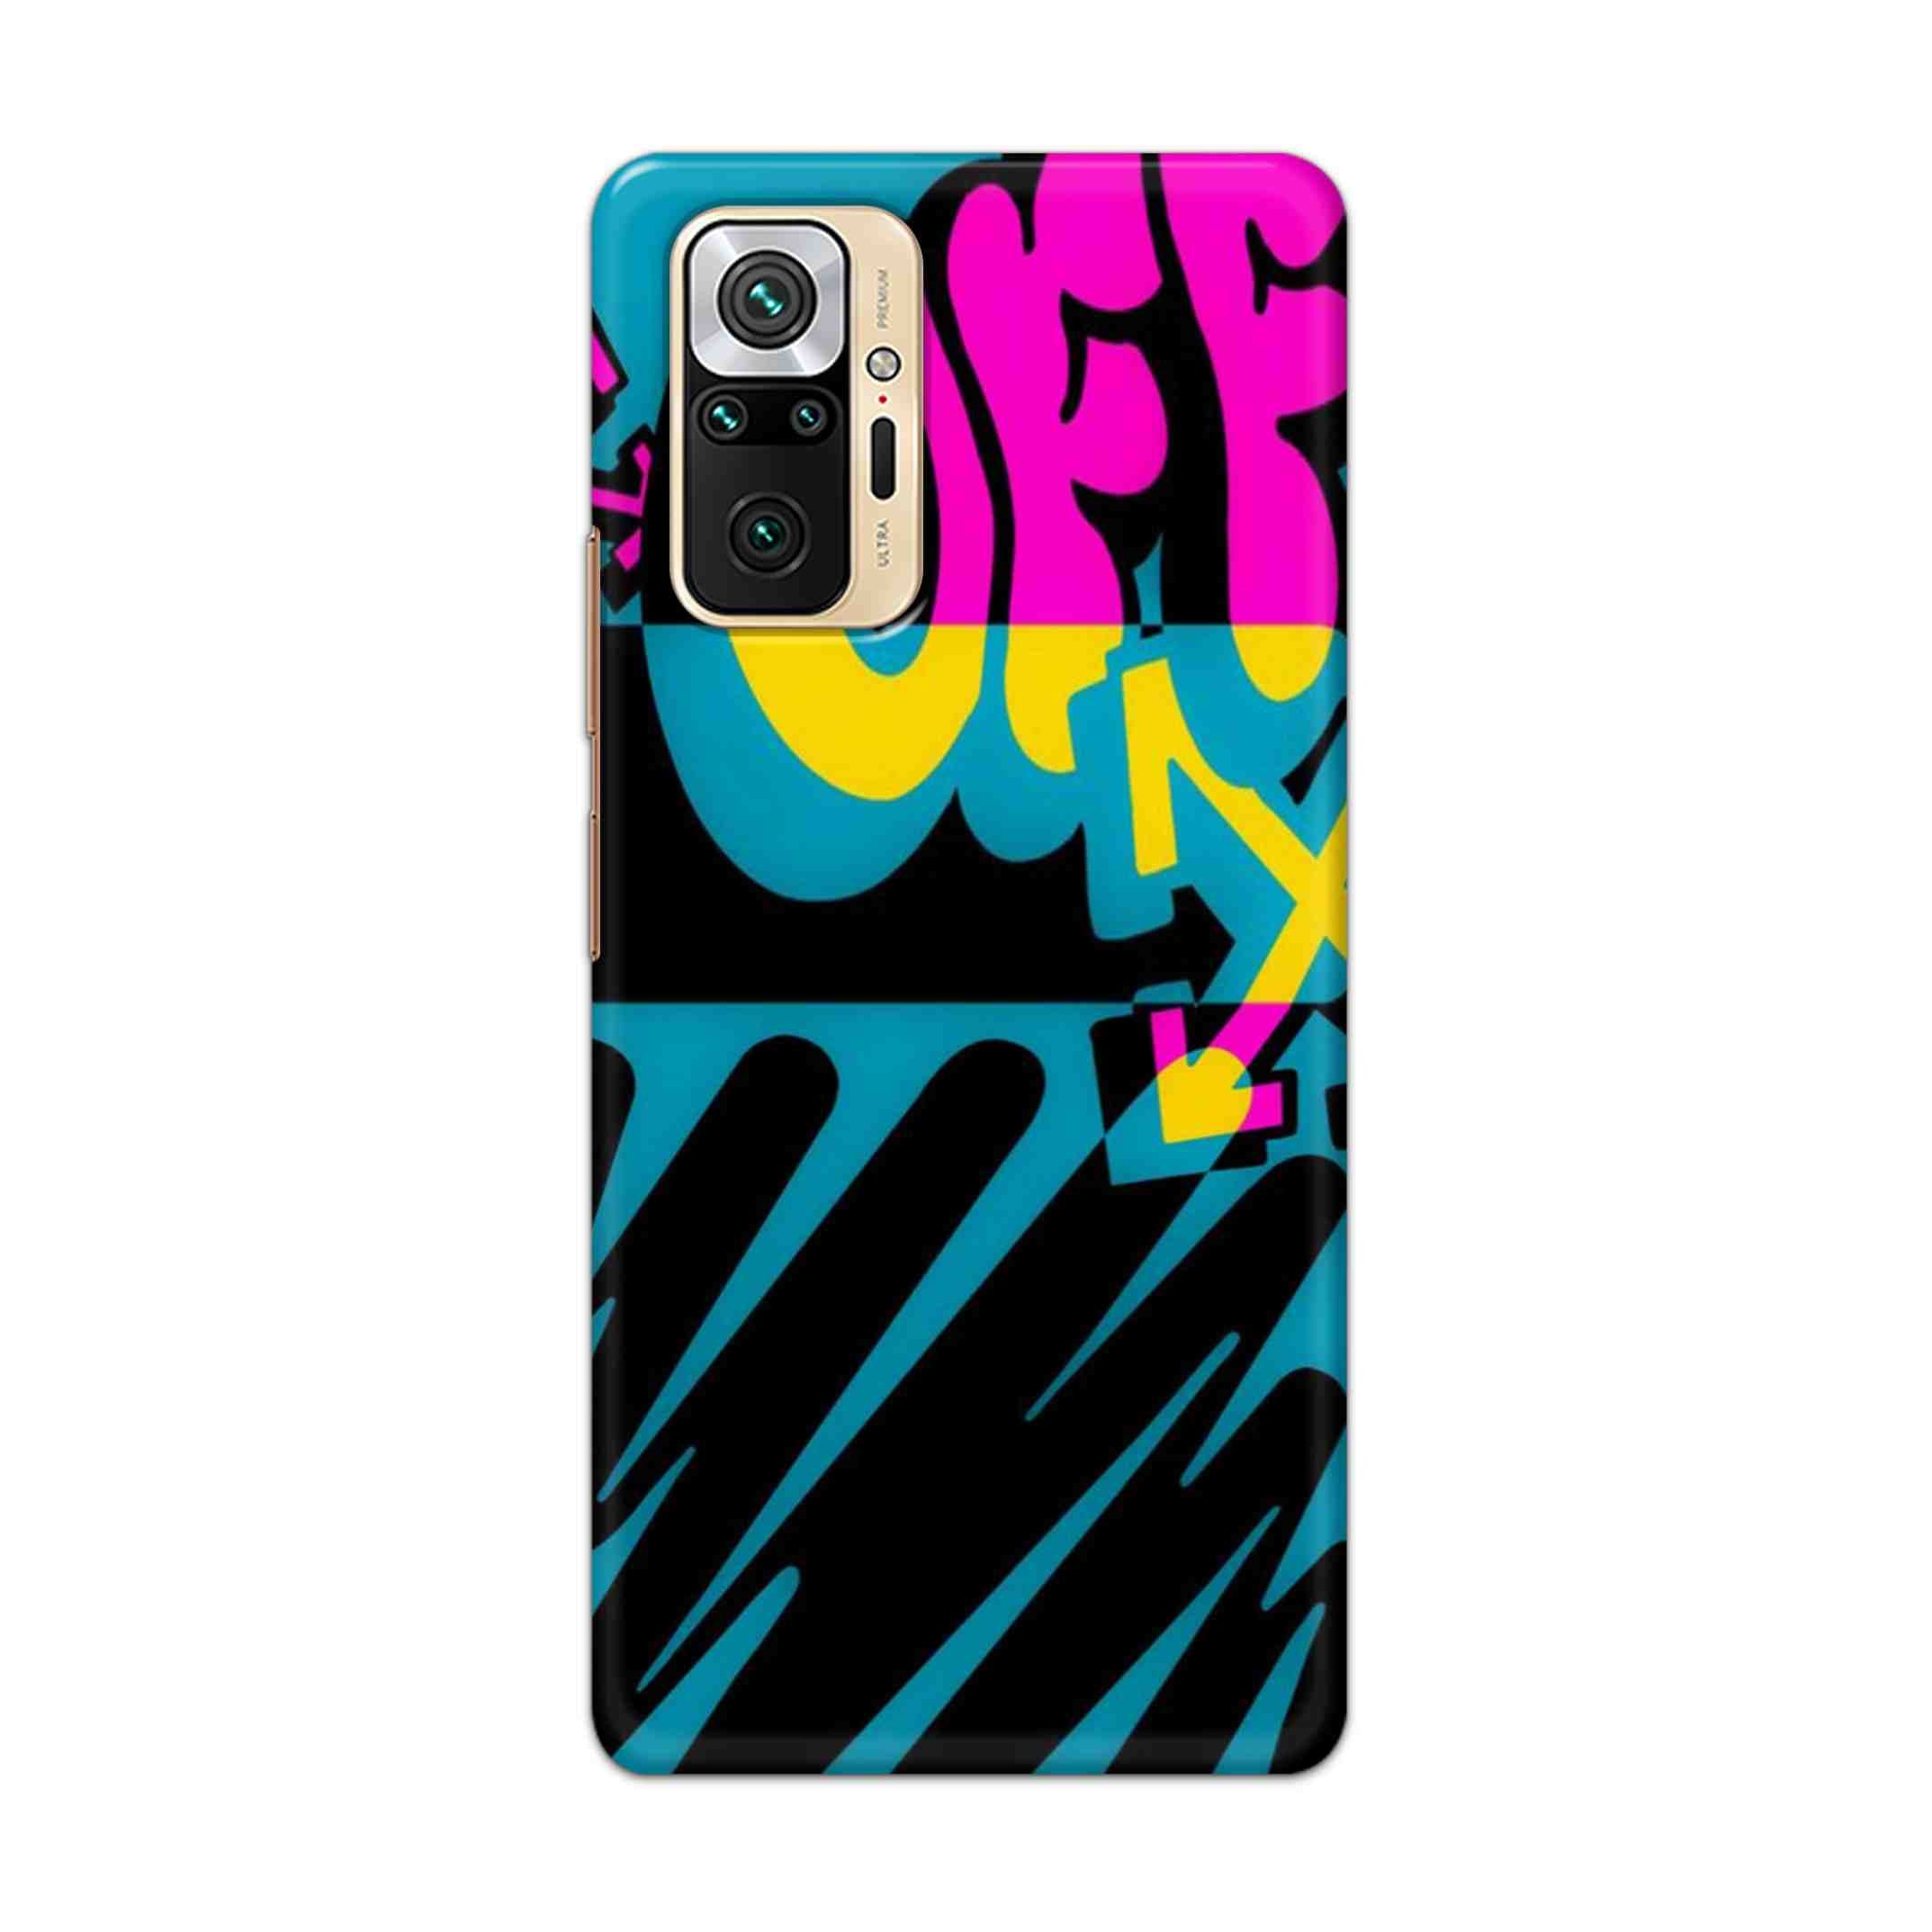 Buy Off Hard Back Mobile Phone Case Cover For Redmi Note 10 Pro Online